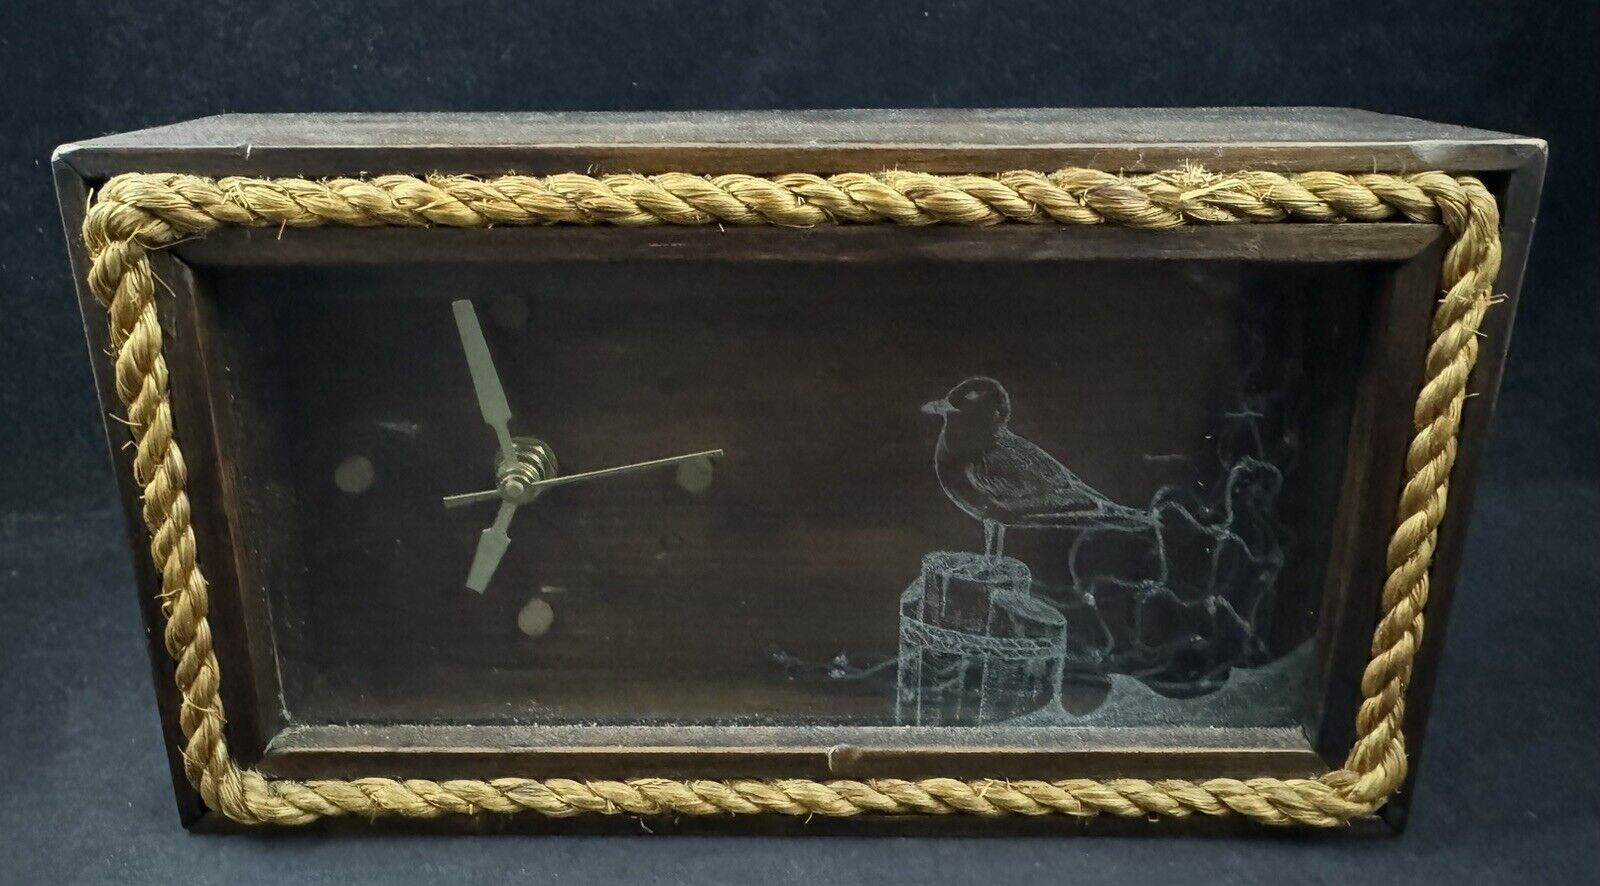 Vintage 1982 Bird Etched Glass Wooden Box Desk Clock by Condor